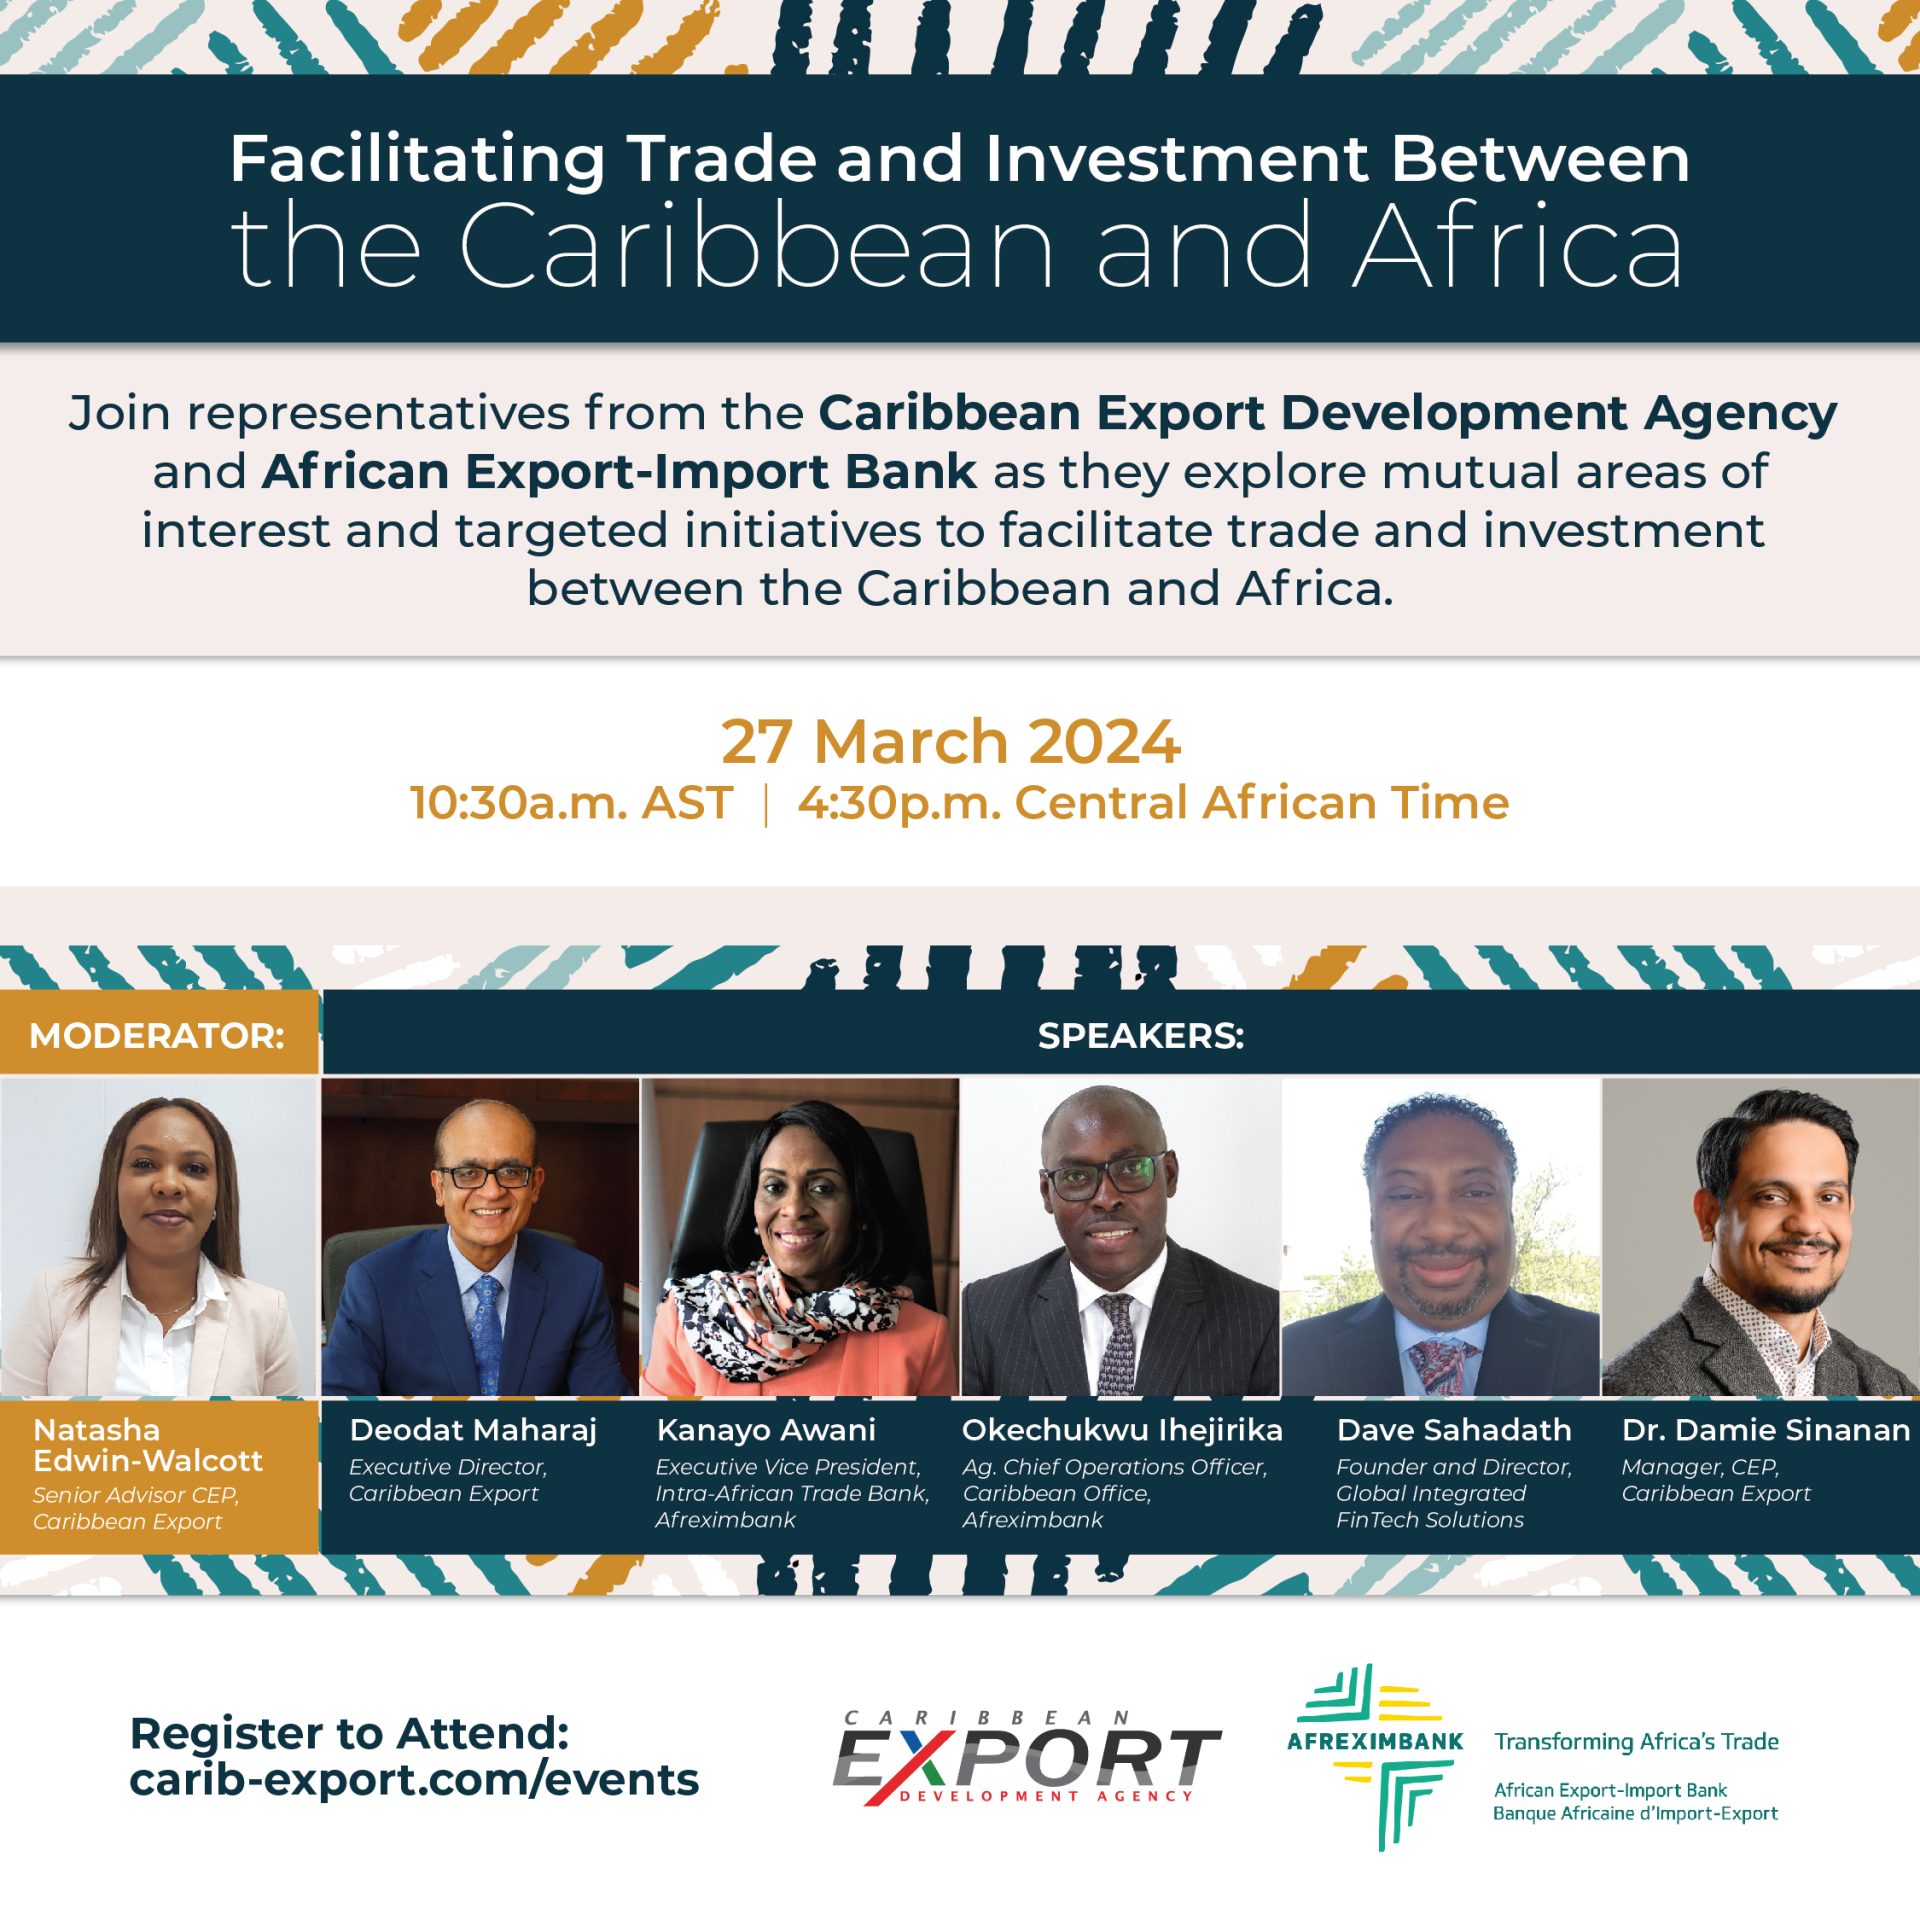 Facilitating Trade and Investment Between the Caribbean and Africa